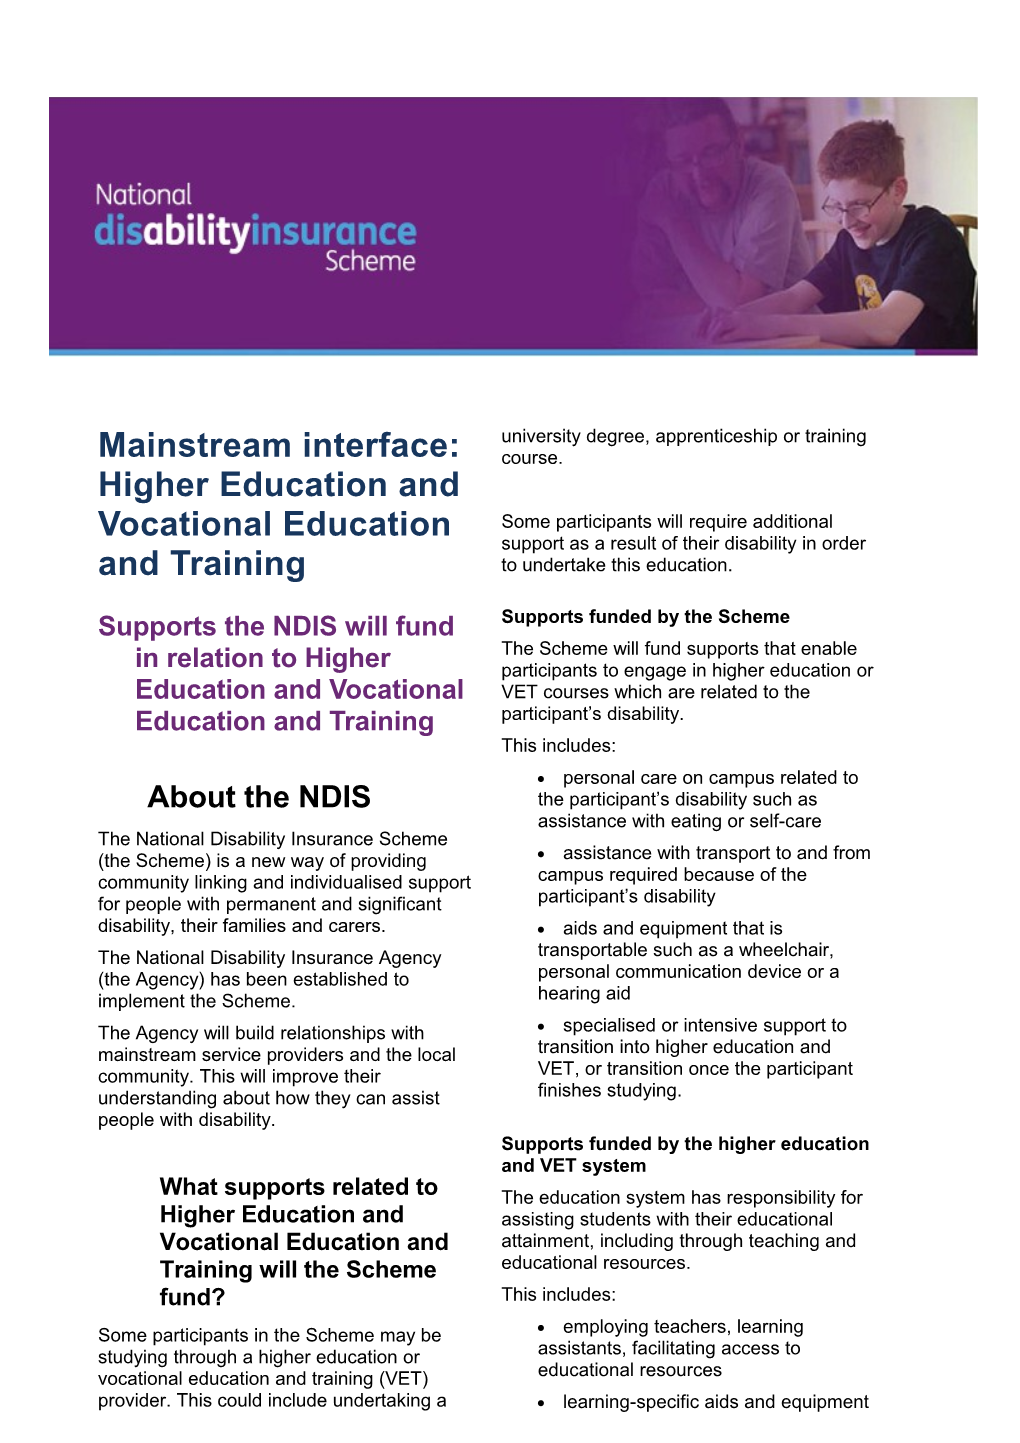 Fact Sheet: Supports the NDIS Will Fund in Relation to Higher Education and Vocational Training